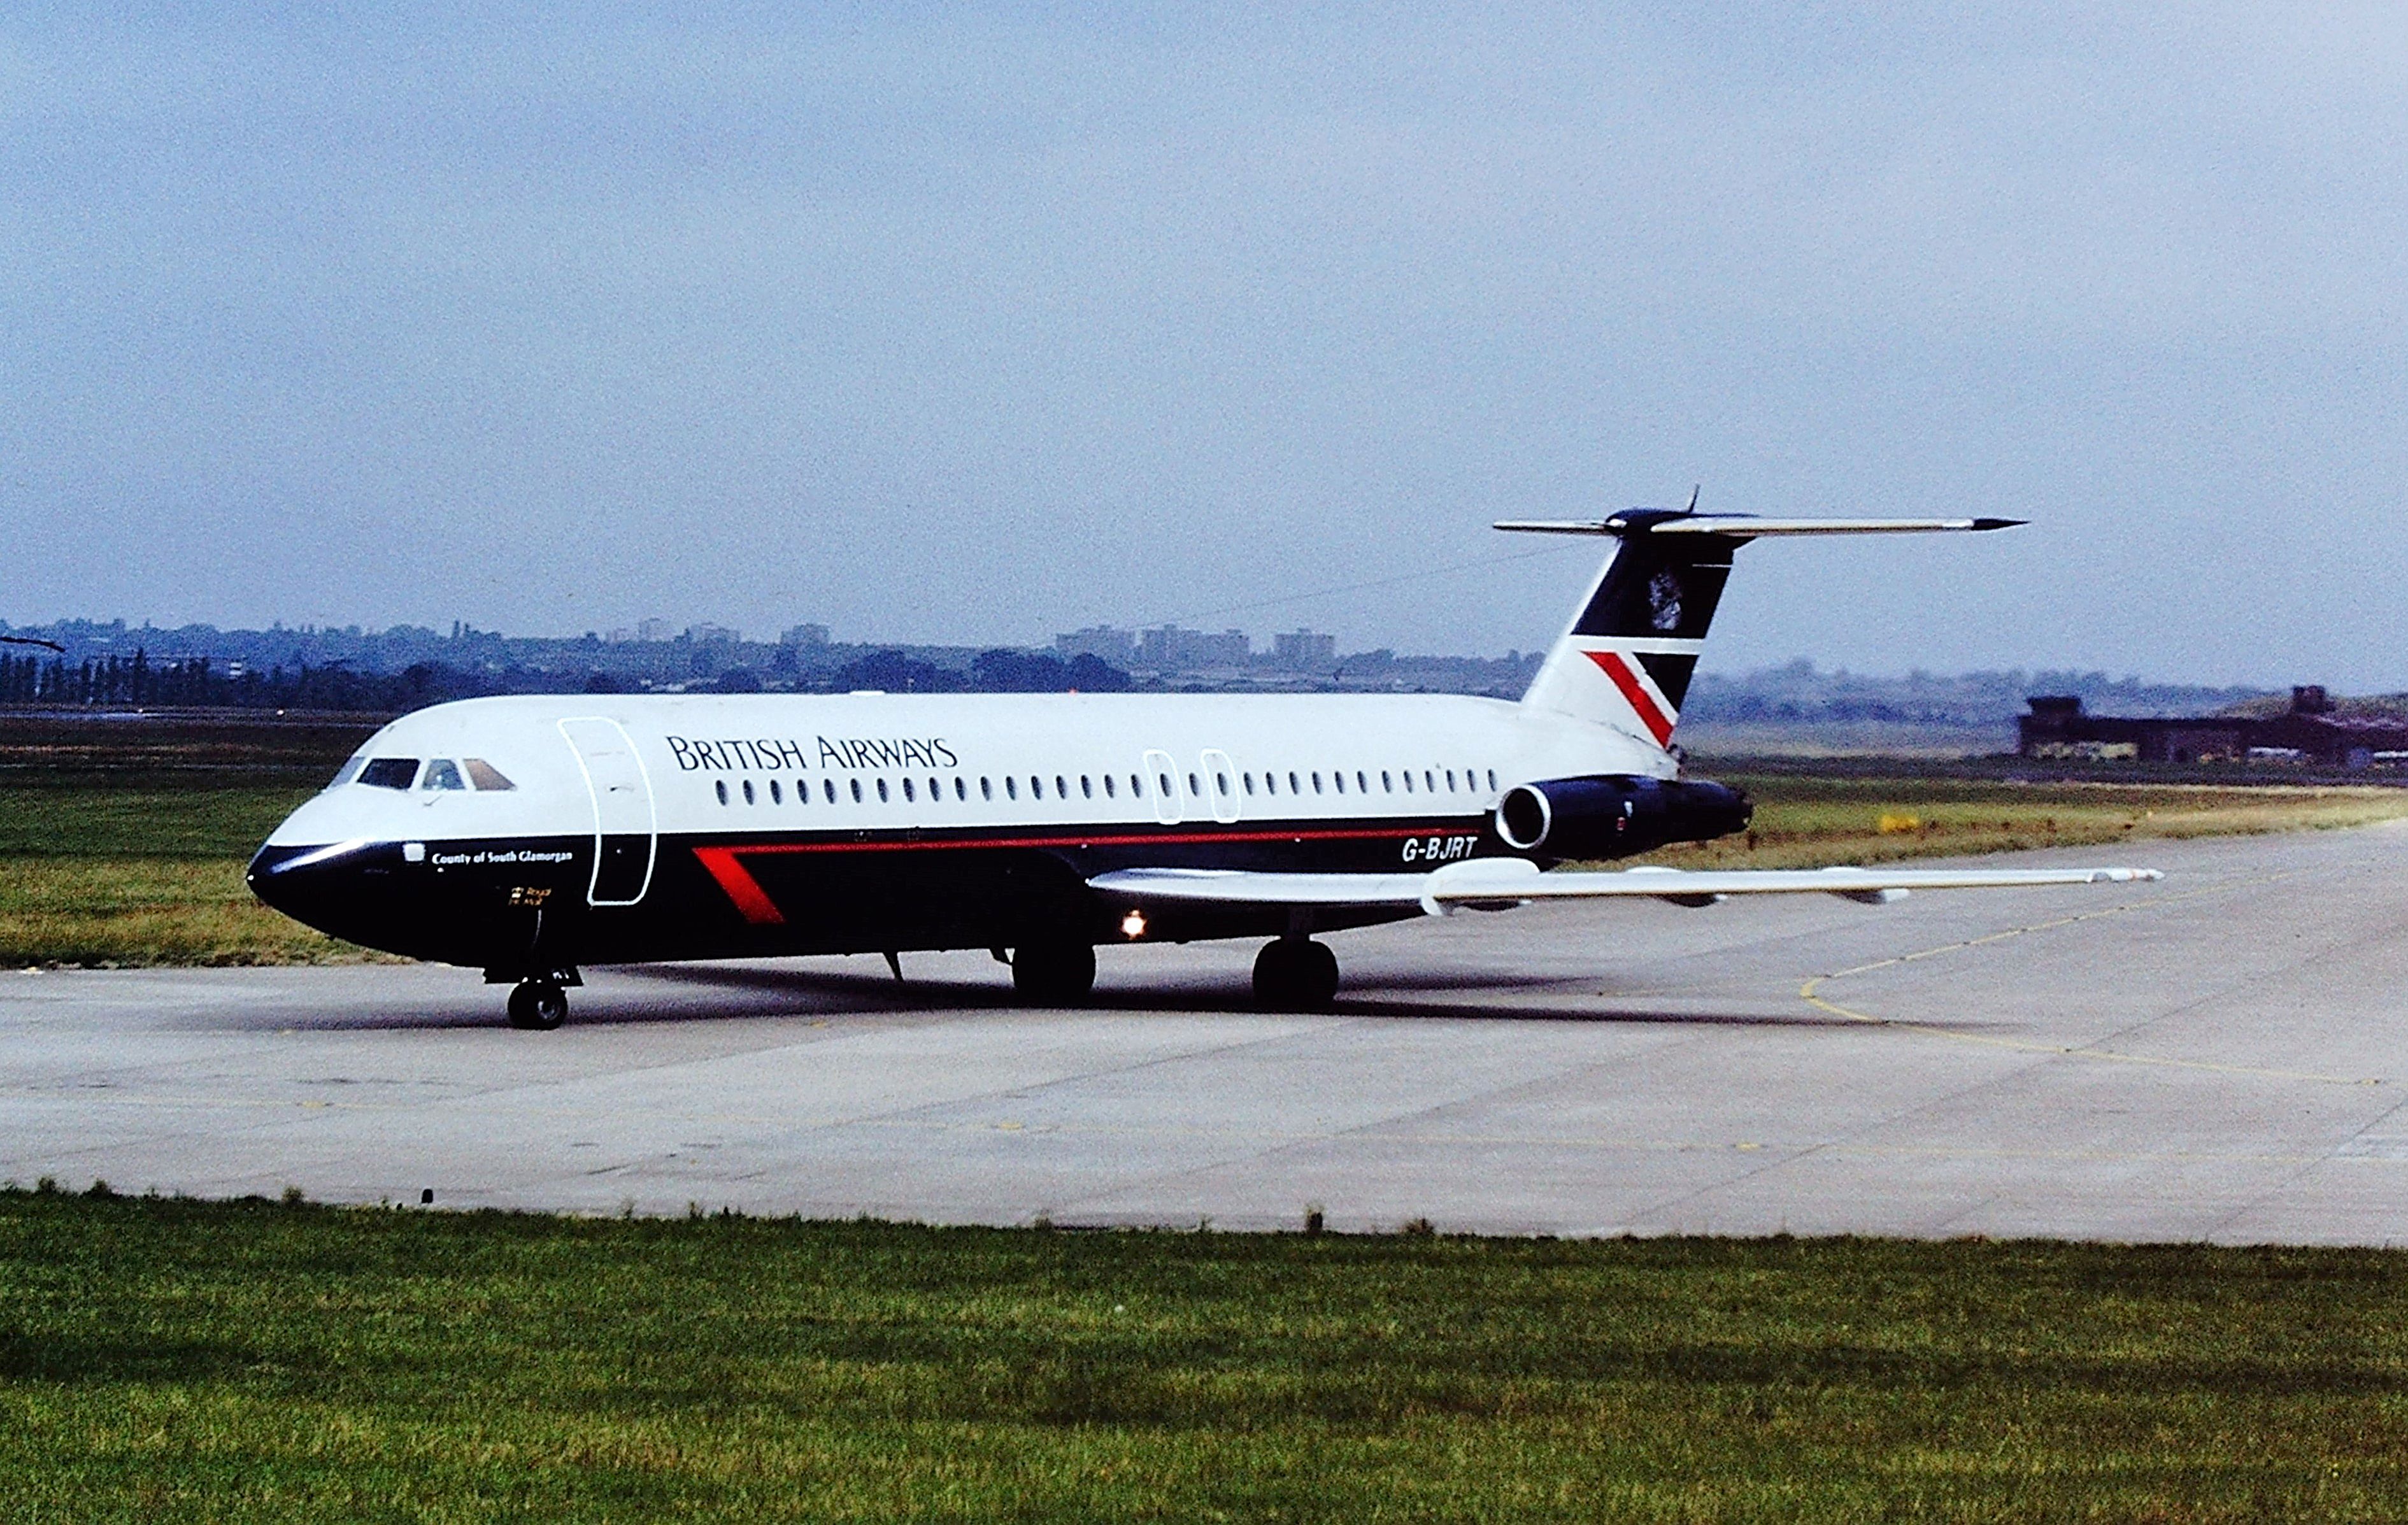 A British Airways BAC 1-11 on an airport apron.